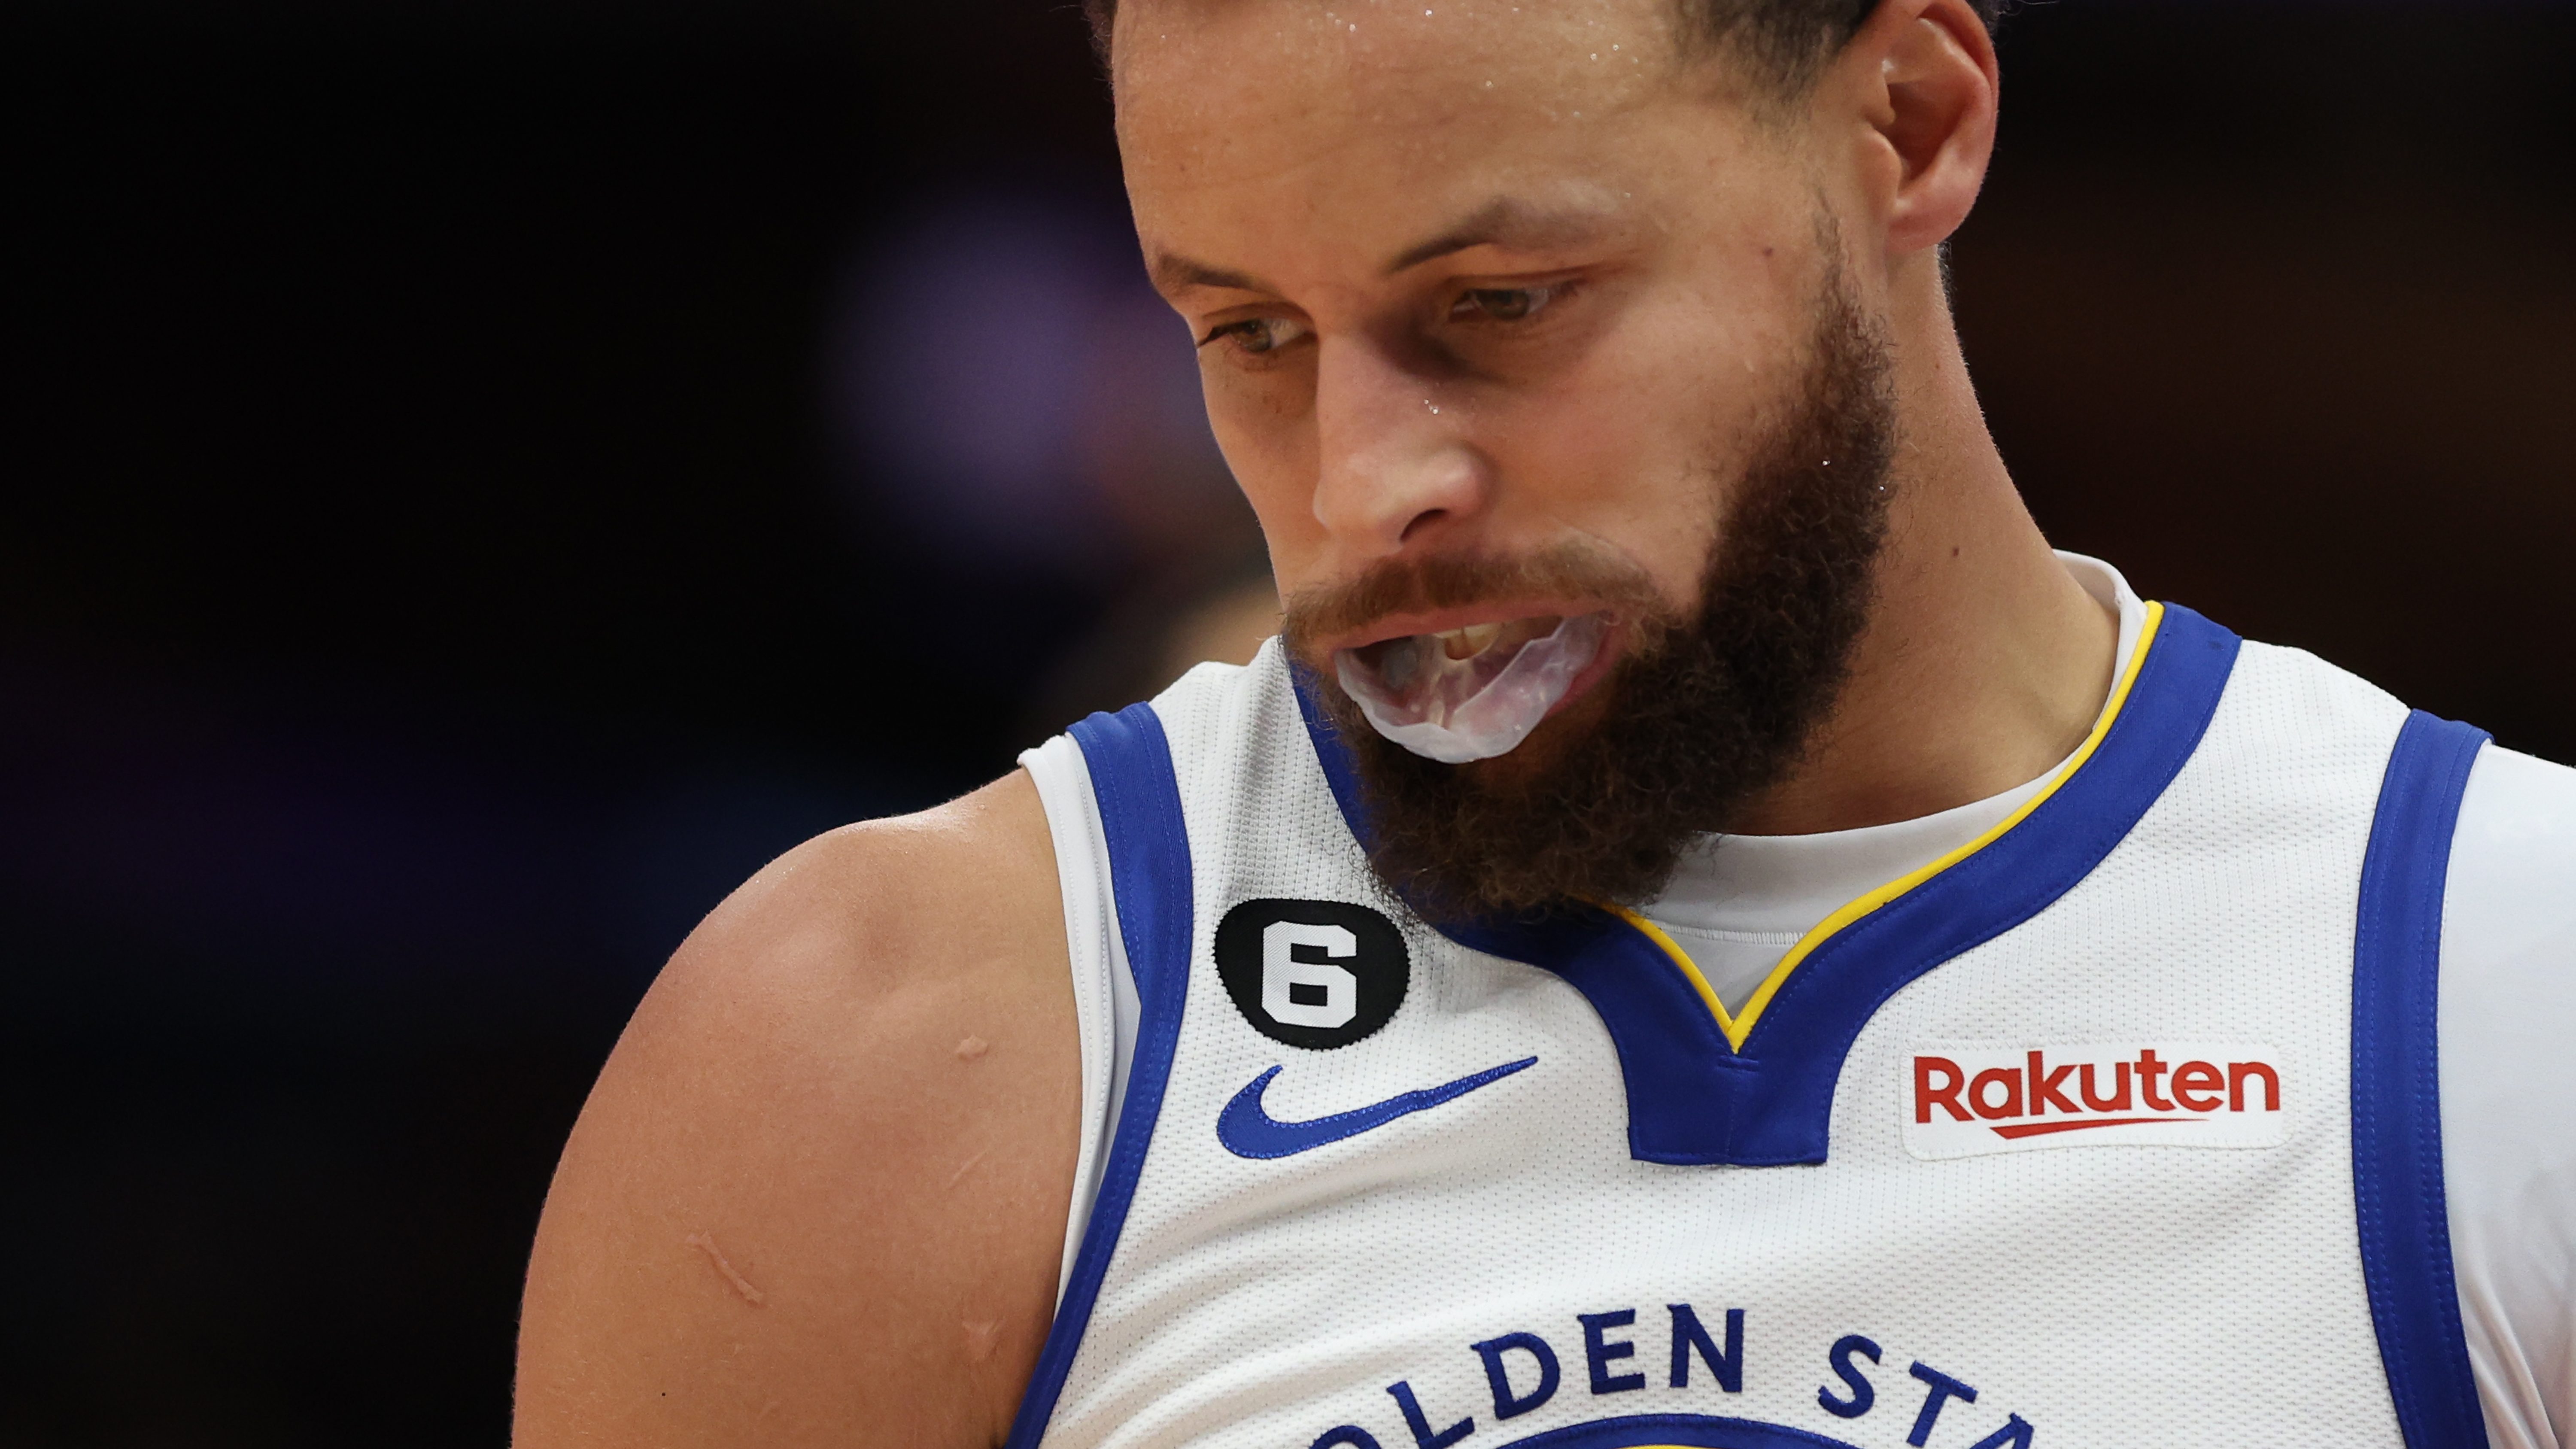 The Daily Sweat: After Steph Curry's 50-point outburst, Warriors